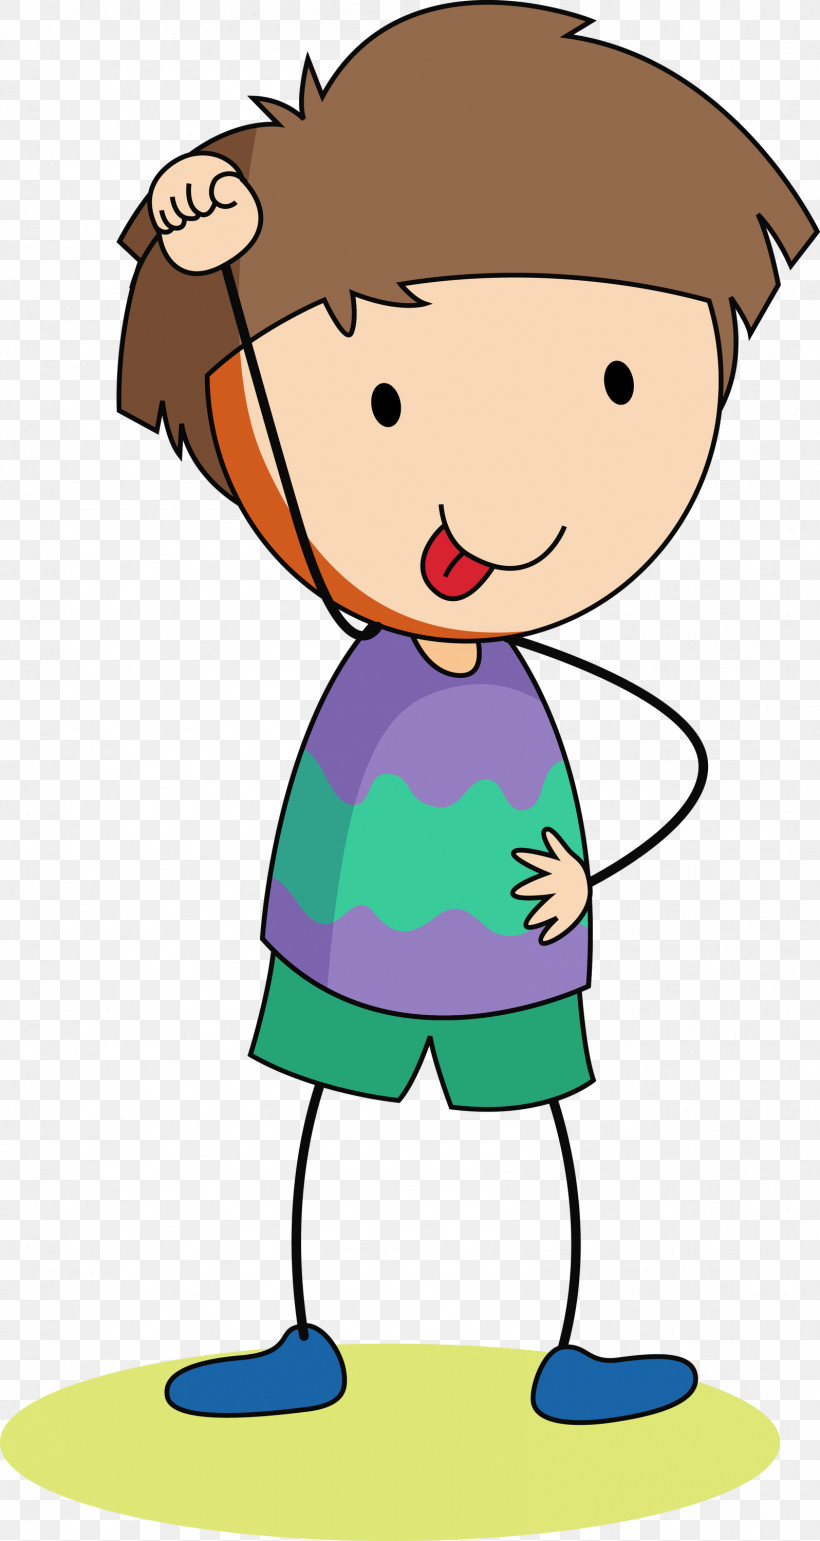 Cartoon Child Pleased, PNG, 1596x3000px, Cartoon, Child, Pleased Download Free